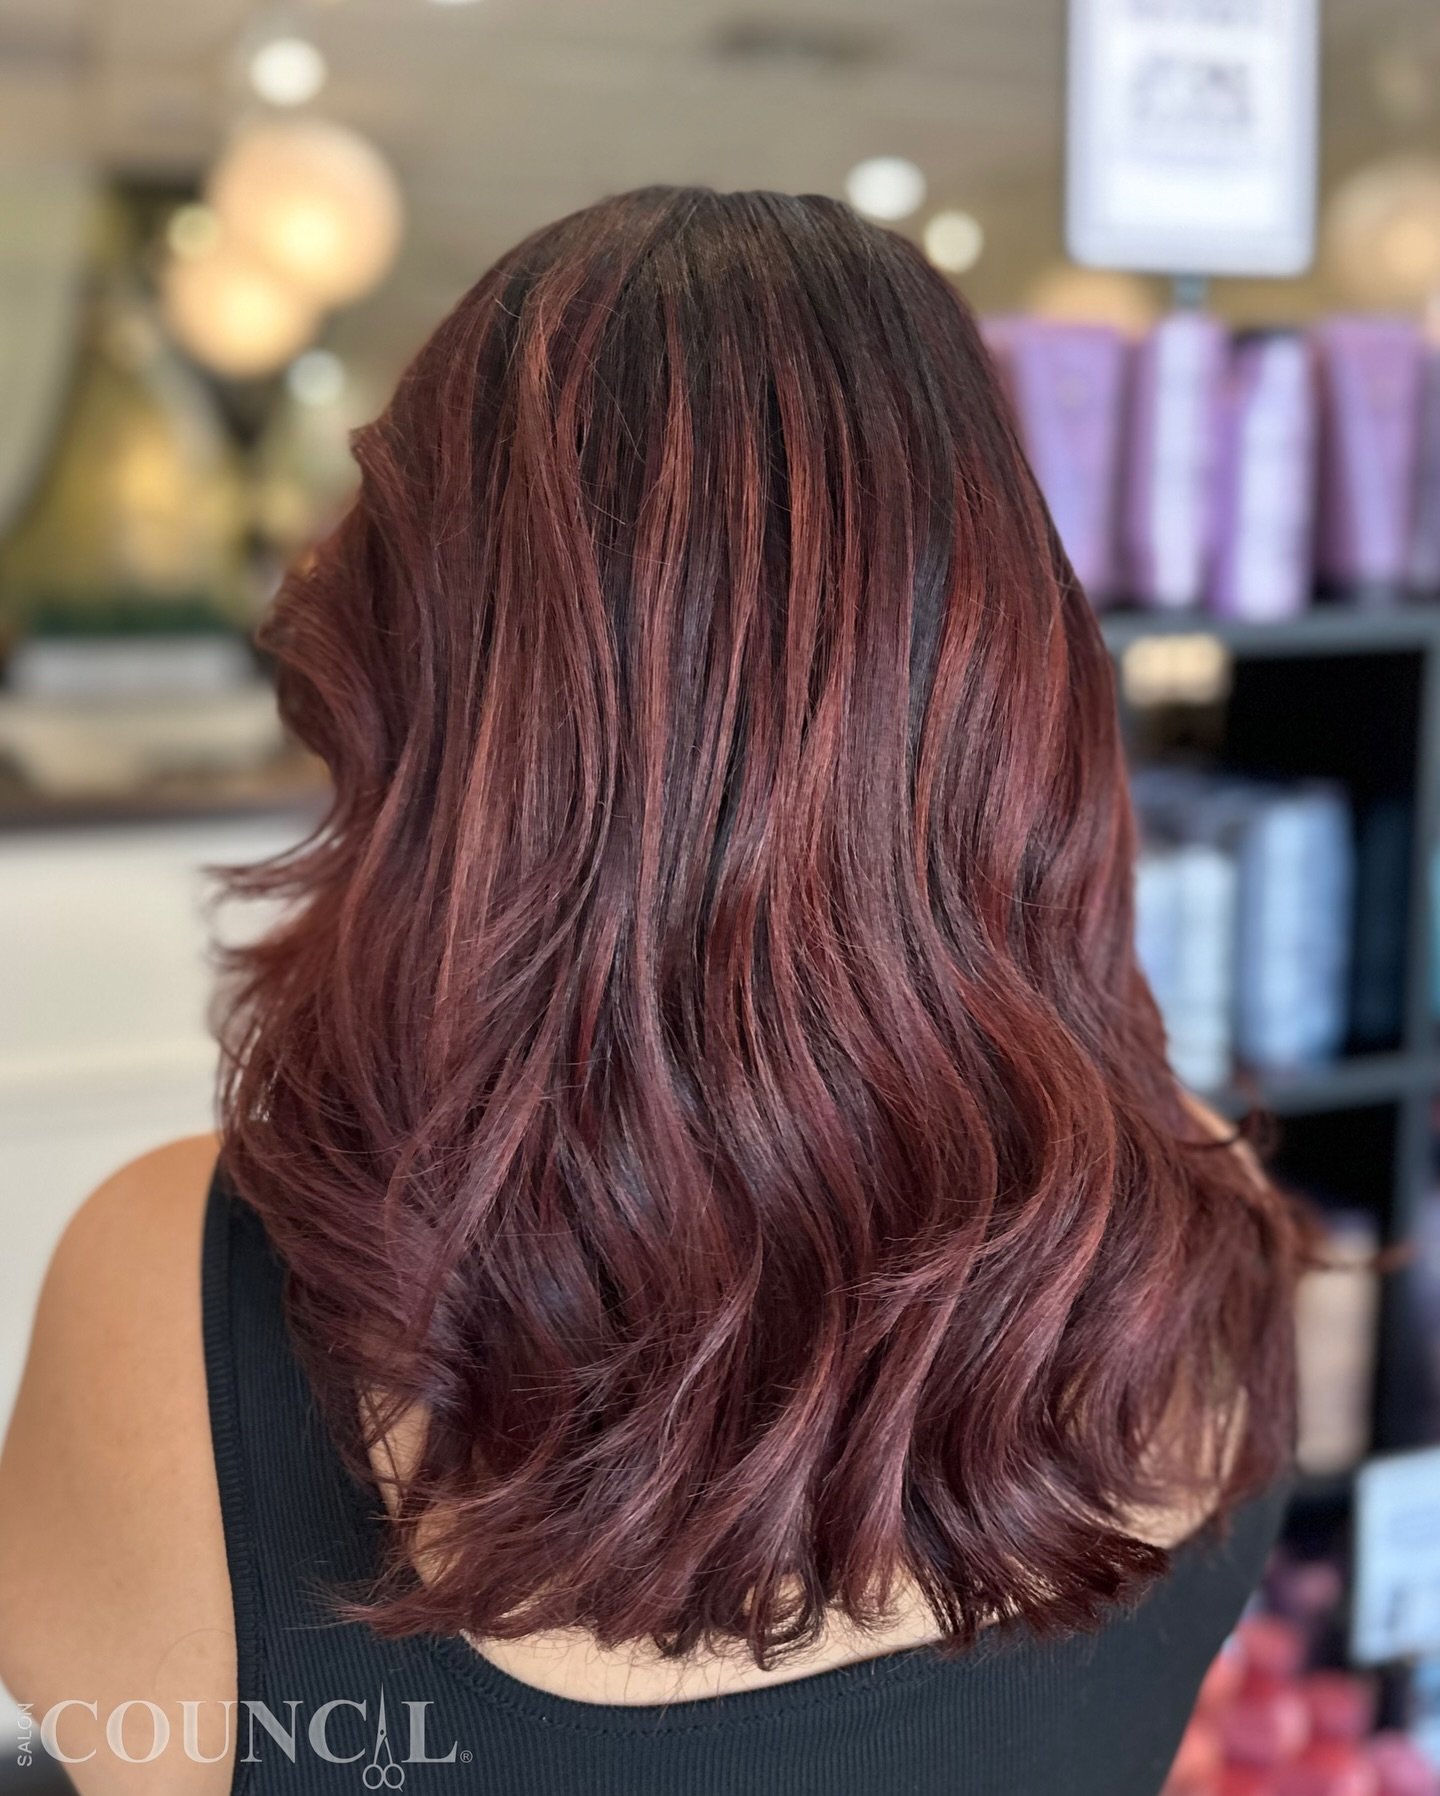 🎉#redrosewine 
Introducing the stunning red rose wine balayage, a blend of dimensional colors enriched with a precise toner and Olaplex treatment, beautifully complemented by a fresh haircut and blowdry style! 🌹 
Unleash your inner radiance. #RoseW